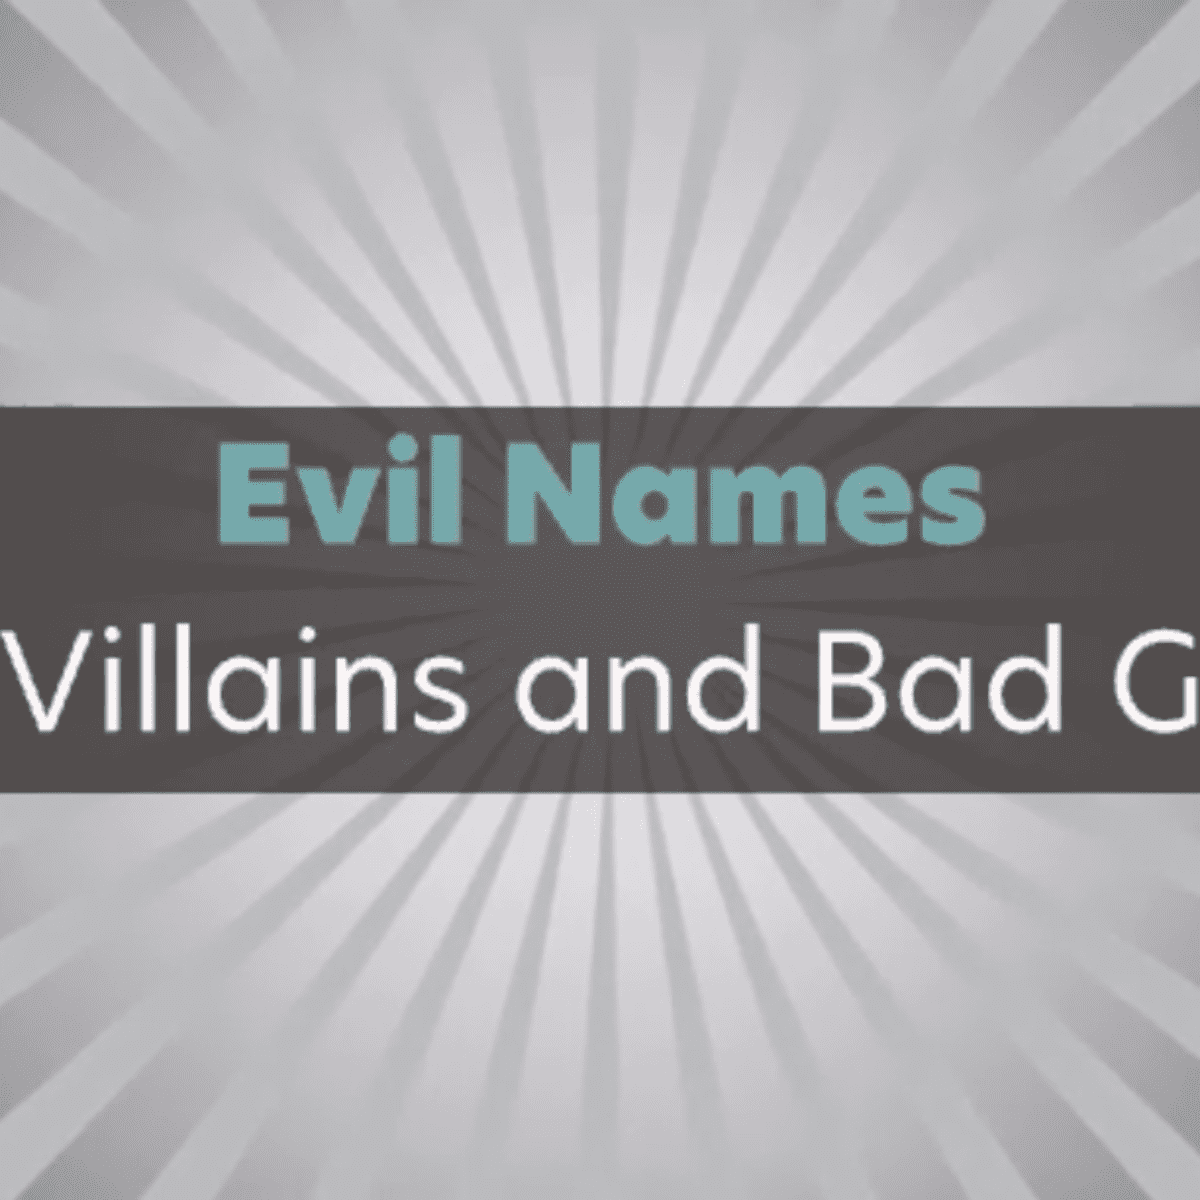 350 Cool Villain Names Being Bad Is More Fun Than Being Good Hobbylark - evil roblox names